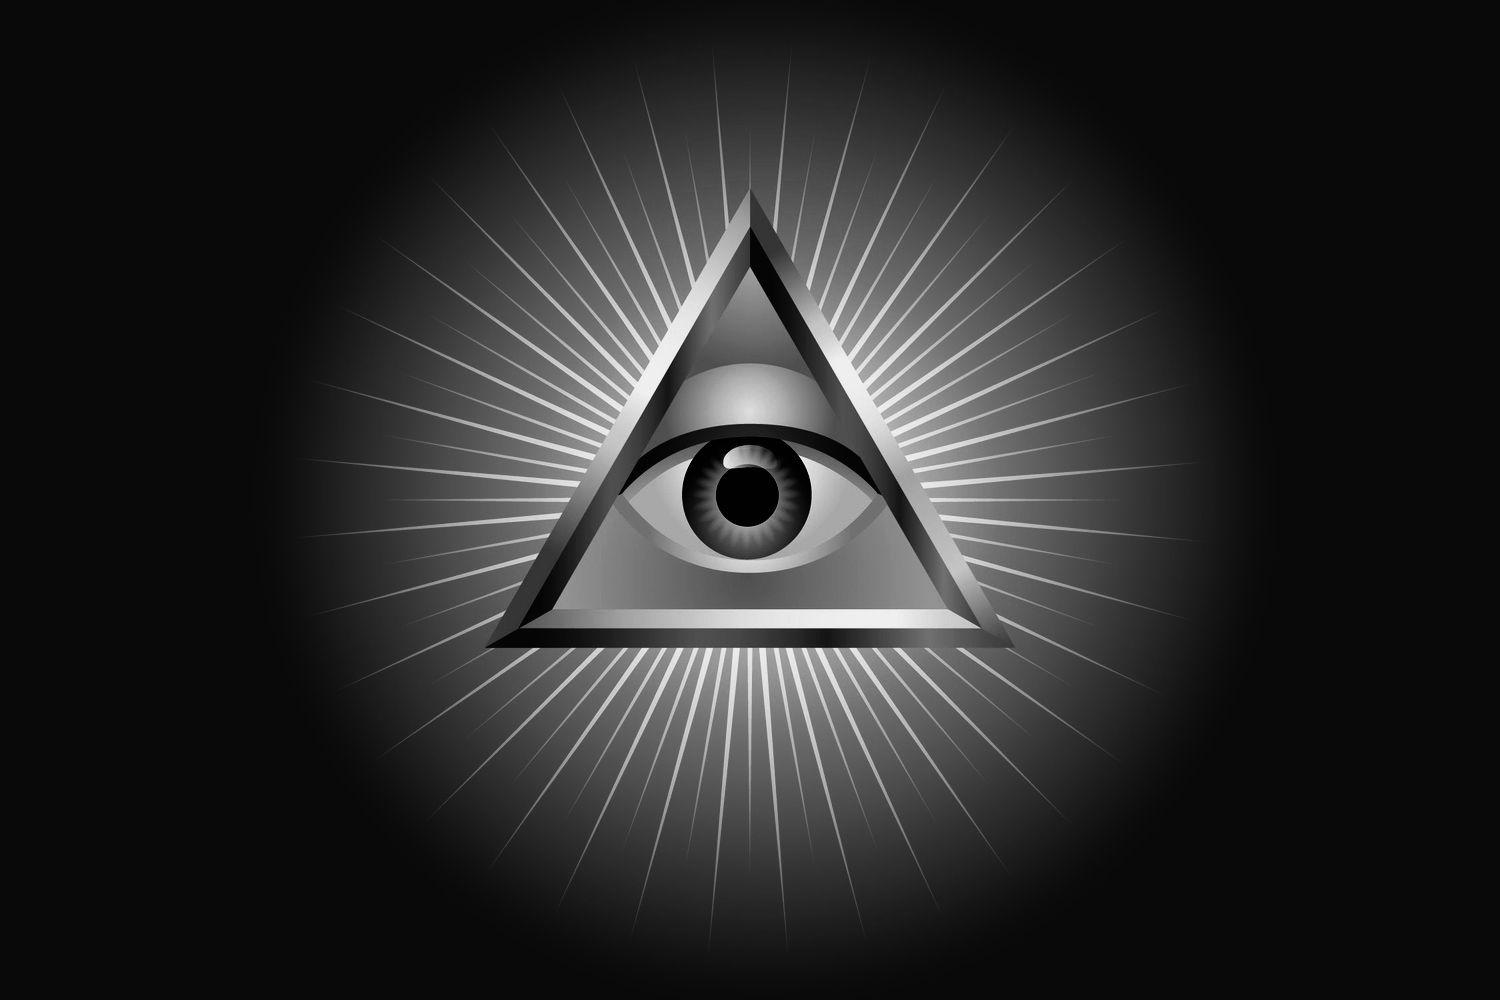 Black and White Triangle with Eye Logo - The All Seeing Eye: A Symbol of Consciousness